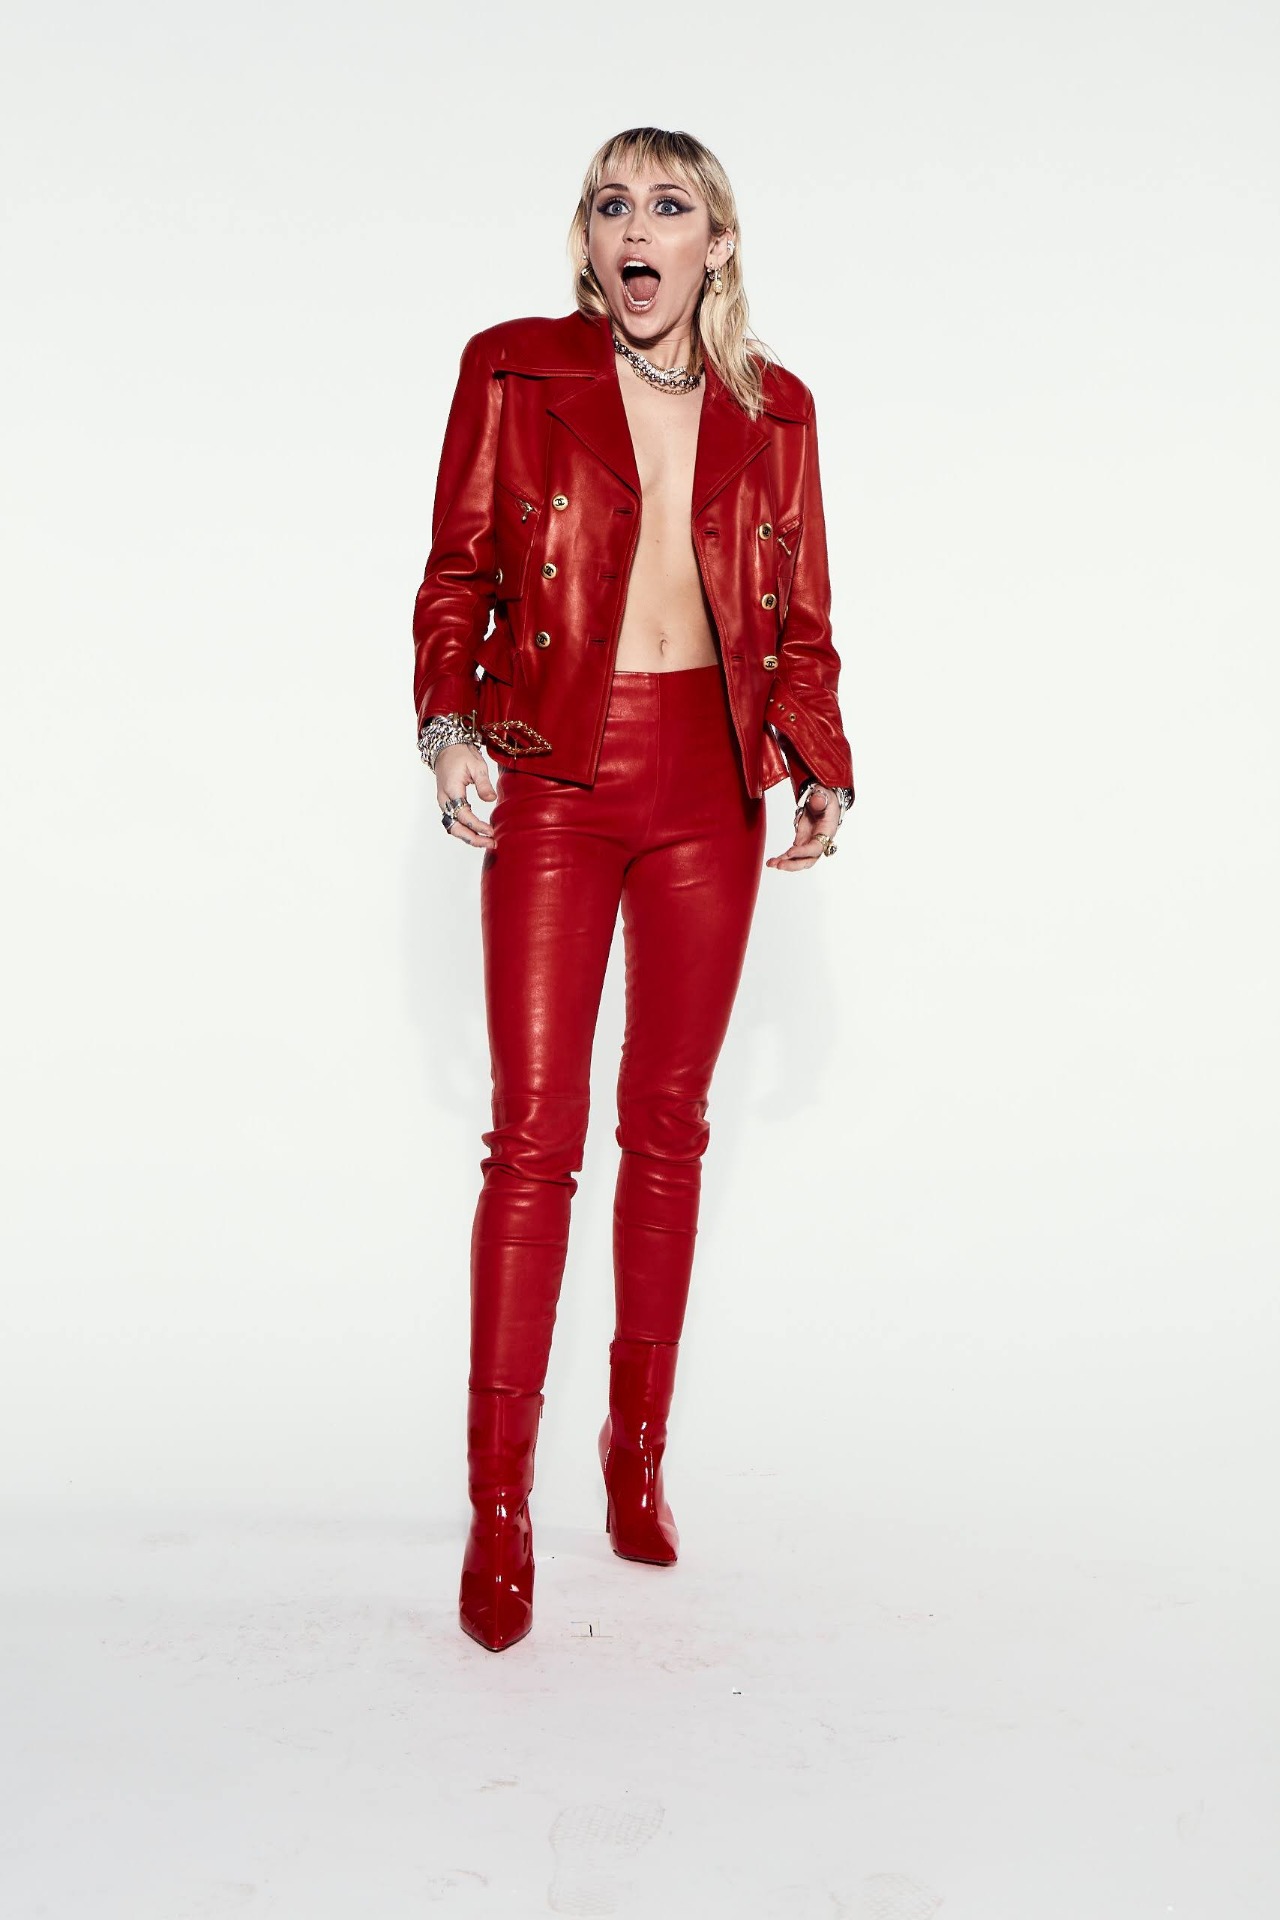 Miley Cyrus 2020 : Miley Cyrus – She is Here Photoshoot-08